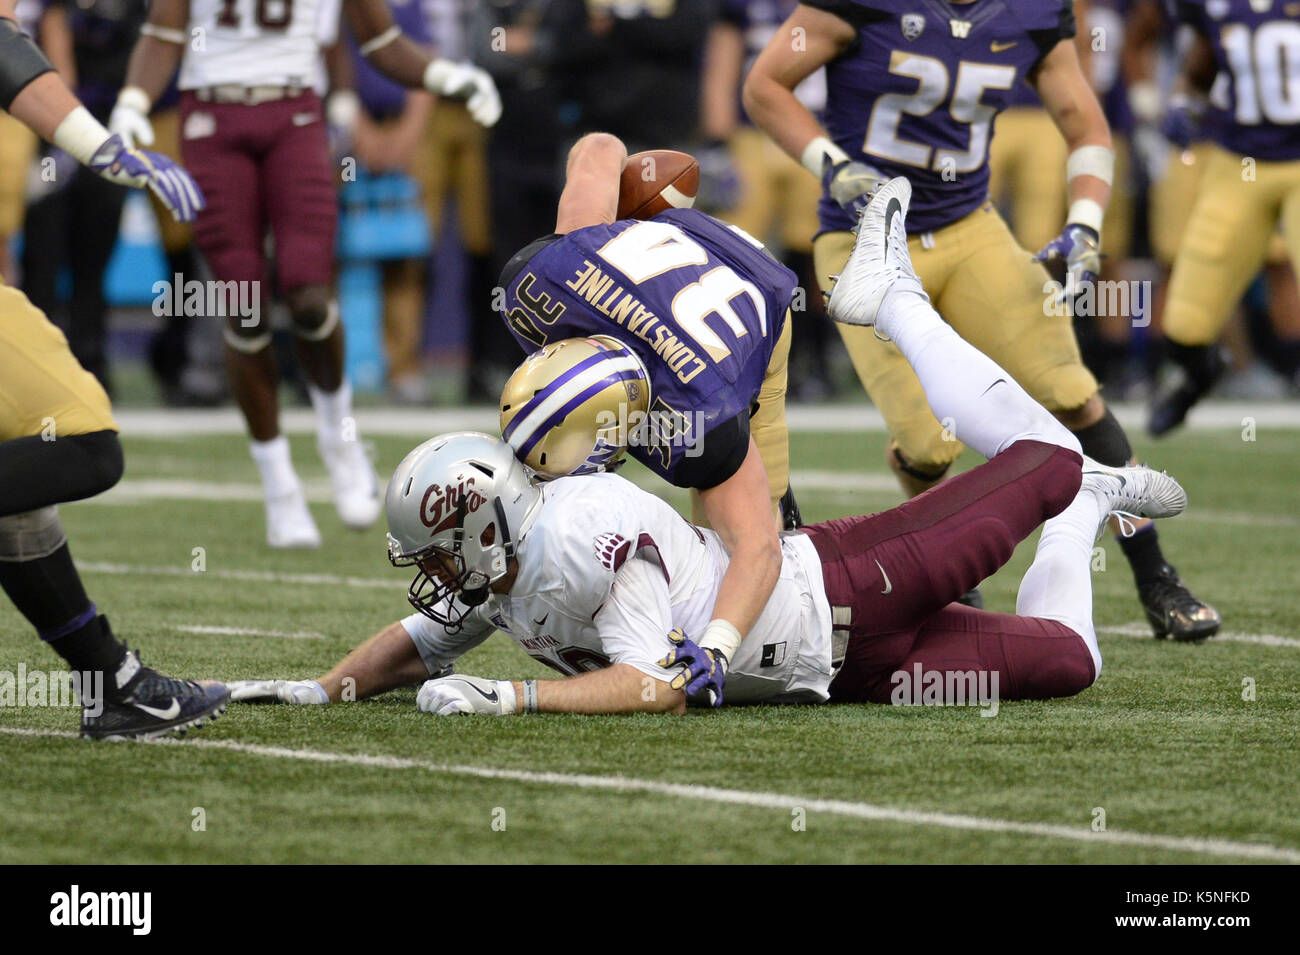 Seattle, WA, USA. 9th Sep, 2017. UW linebacket Sean Constantine (34) intercepts a pass in a game between the Montana Grizzlies and the Washington Huskies. The game was played at Husky Stadium on the University of Washington campus in Seattle, WA. Jeff Halstead/CSM/Alamy Live News Stock Photo